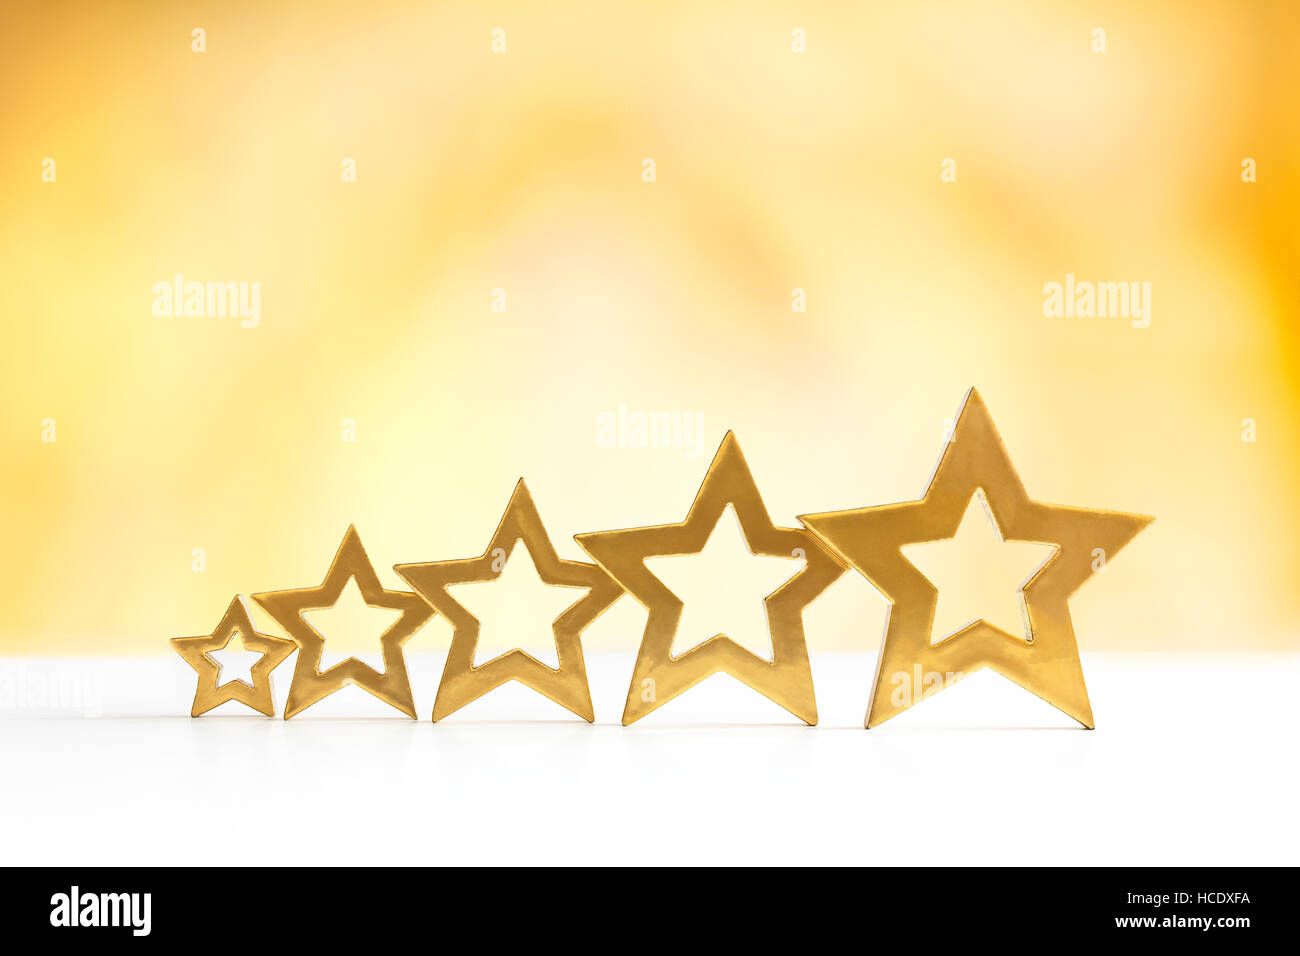 Five golden shining stars in ascending order on white and yellow background, flames, fire, copy space Stock Photo